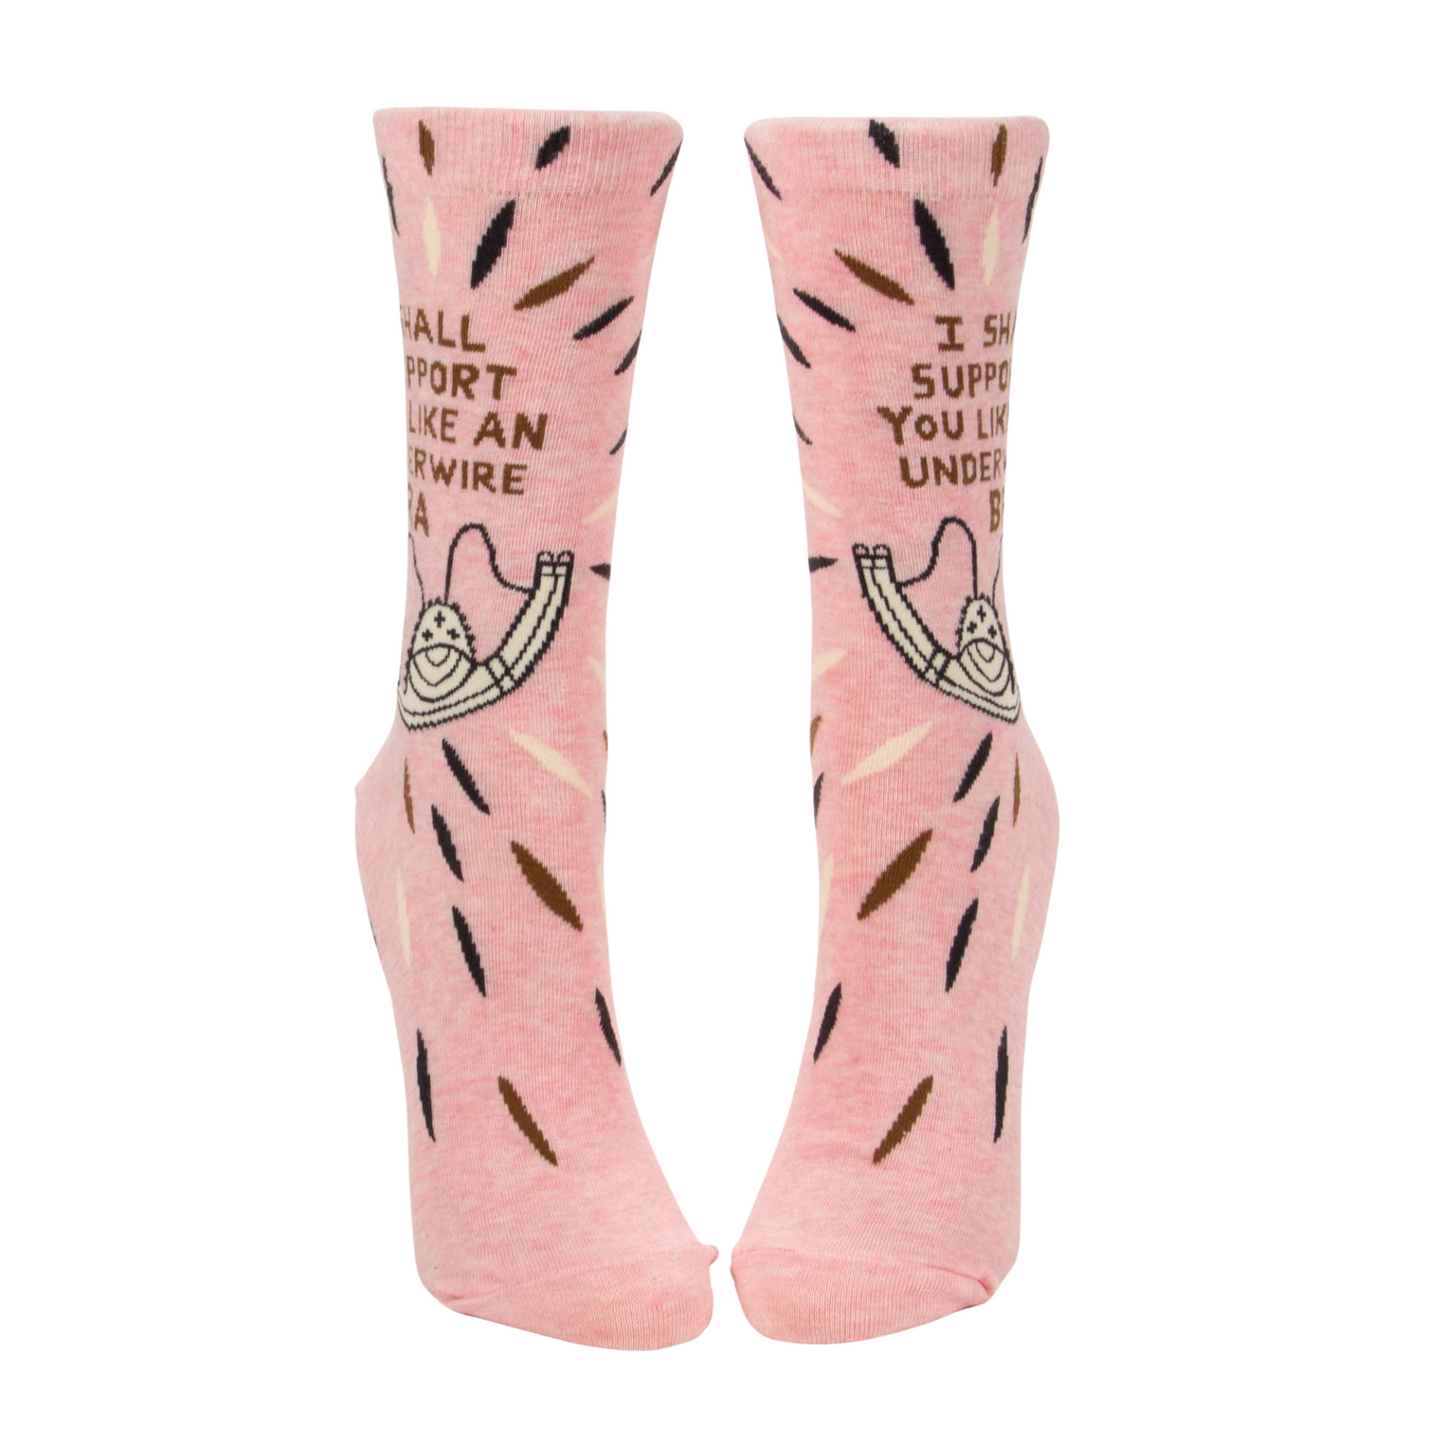 I Shall Support You Like An Underwire Bra Womens Socks